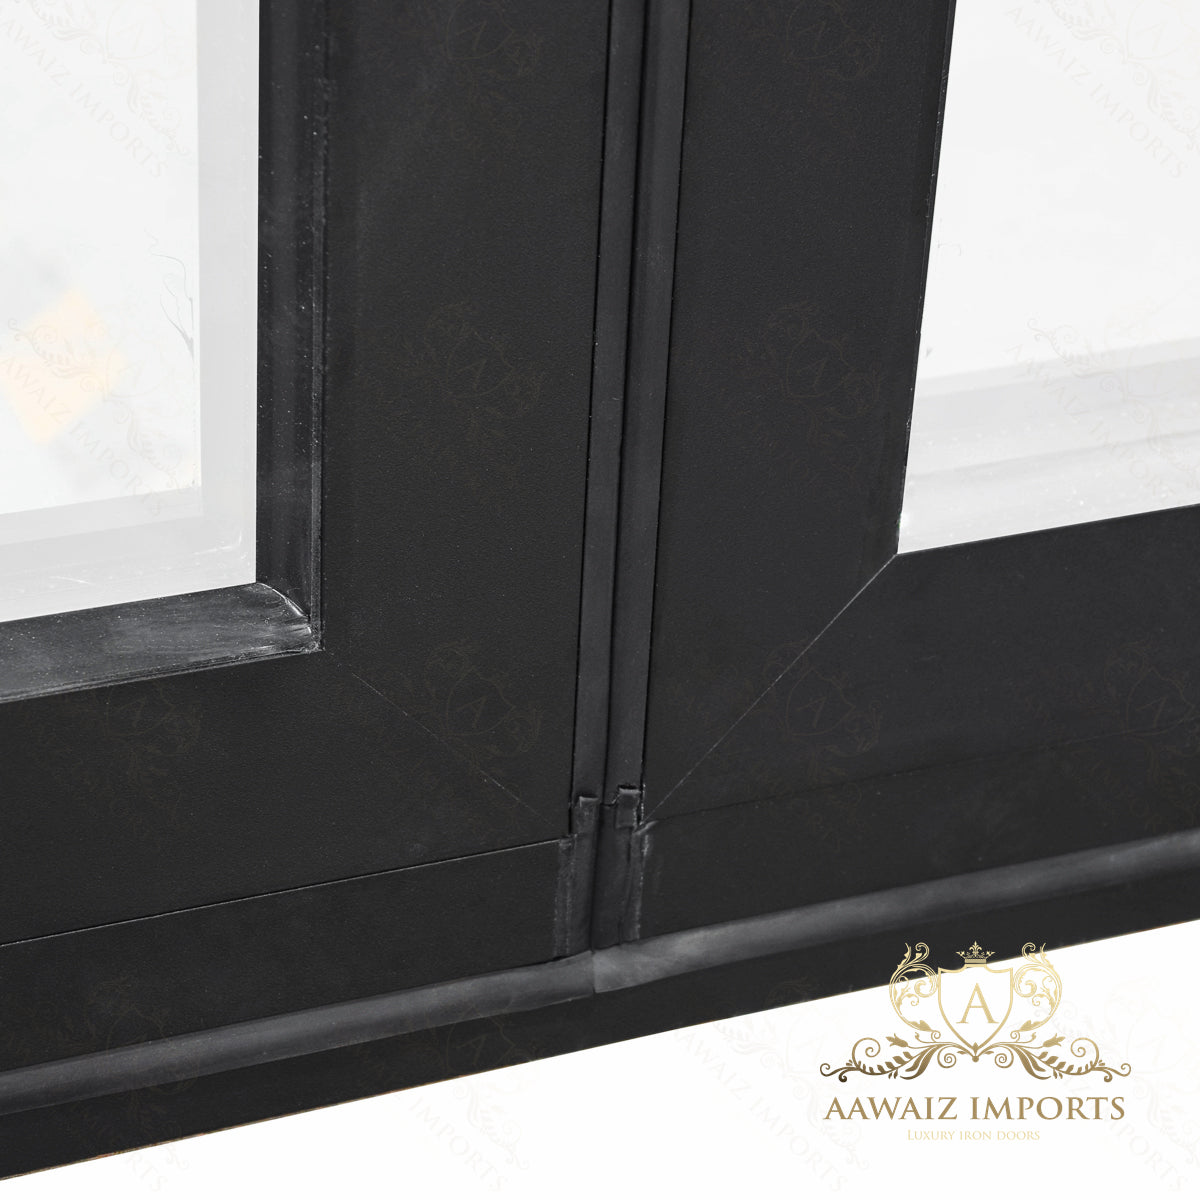 9 Ft Wide By 7 Ft Tall (108" By 84") Aluminum Bi Fold Patio Door Outswing  Thermal Break Insulated Matt Black Finish